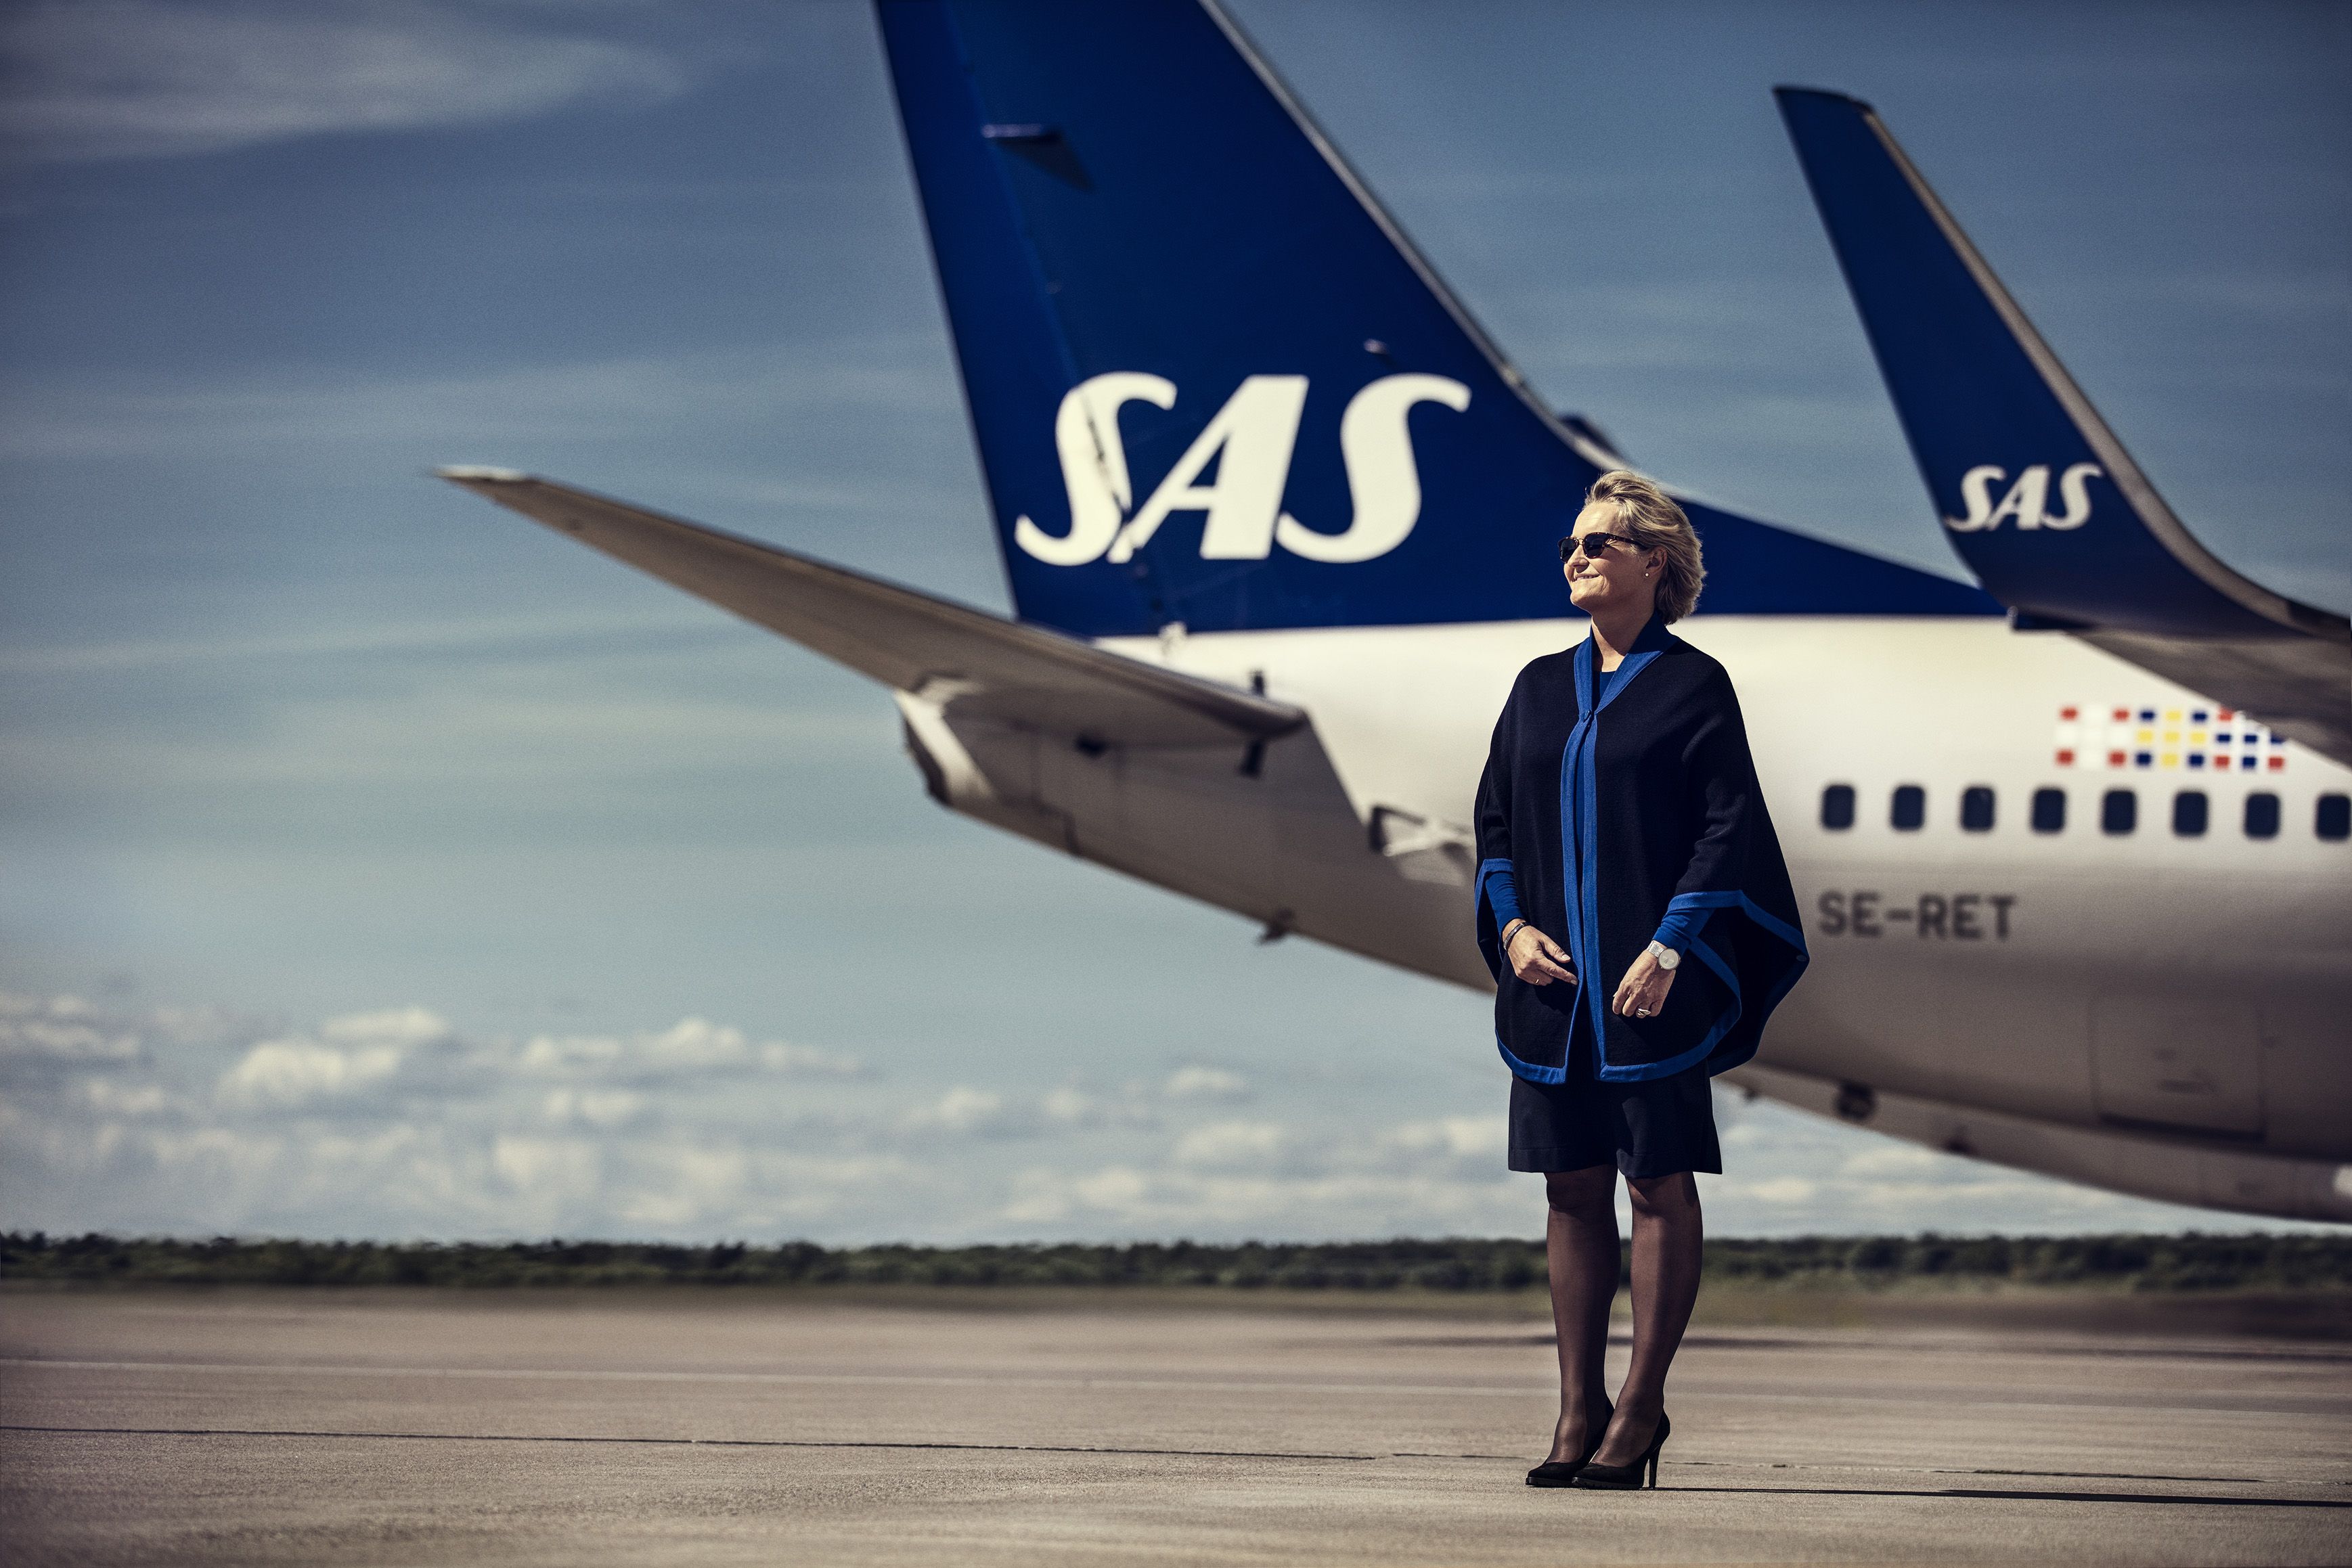 SAS launches new year round route between Helsinki and Malaga